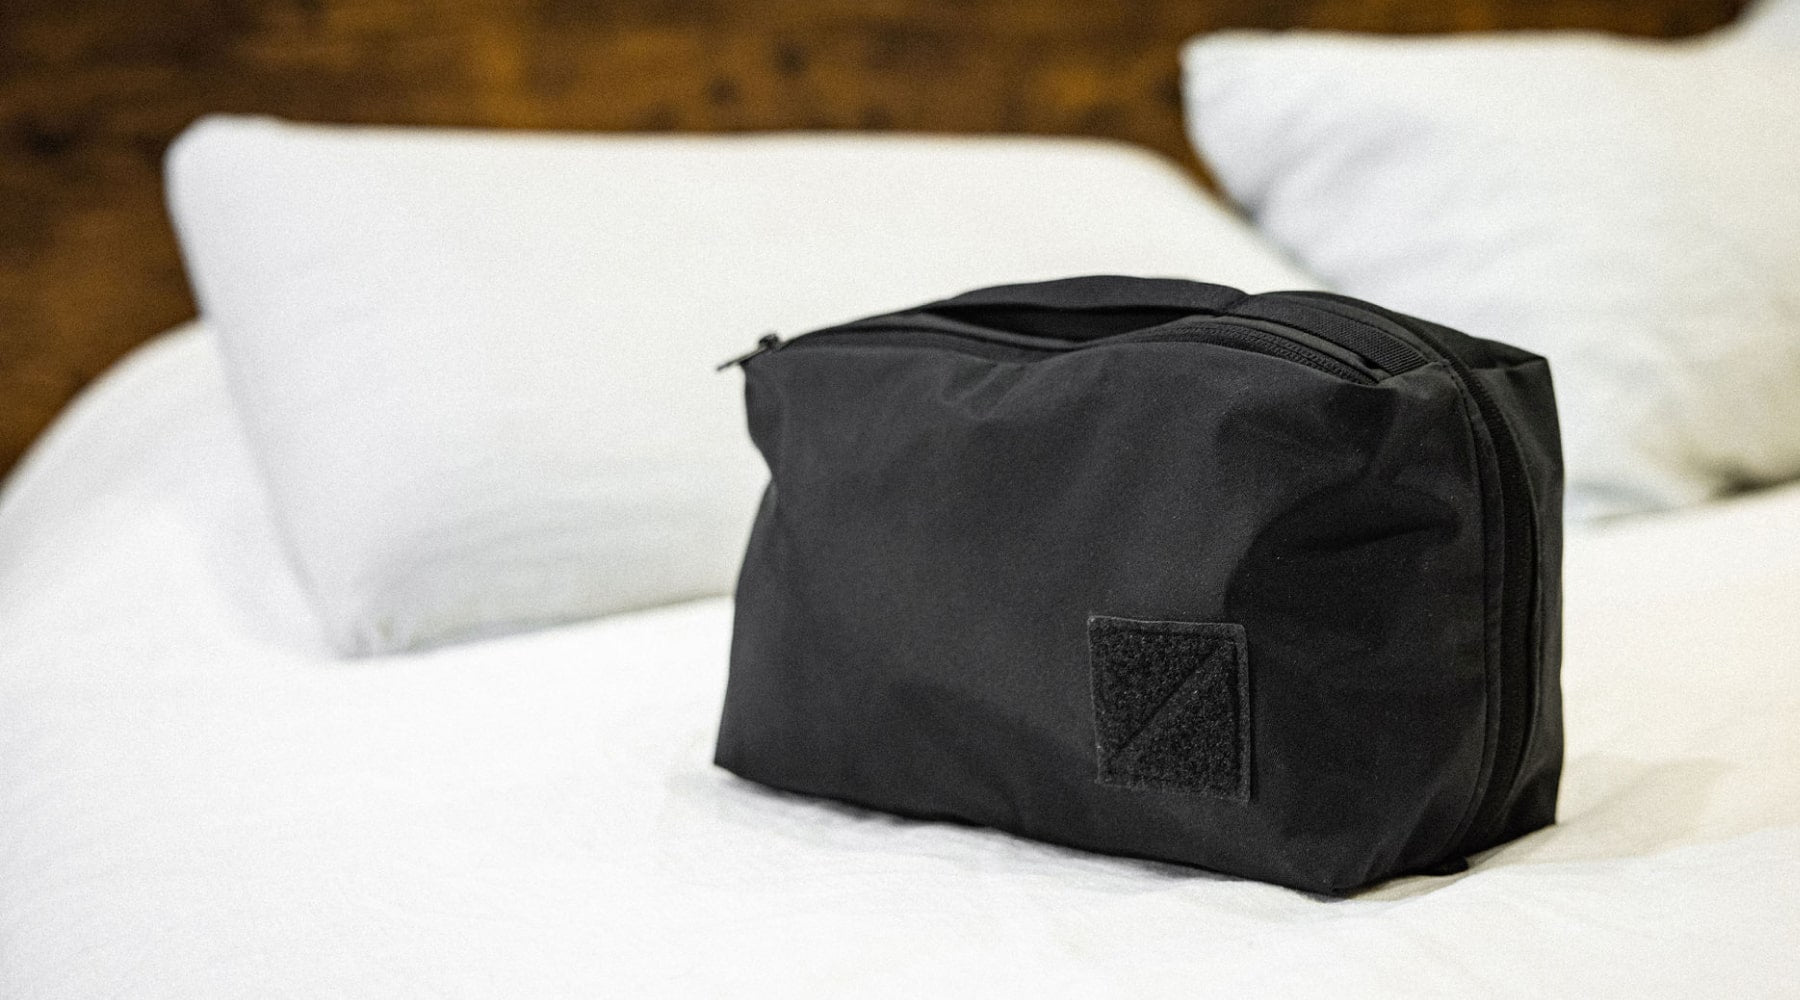 Transit Packing Cube 8L has a slick, durable textile